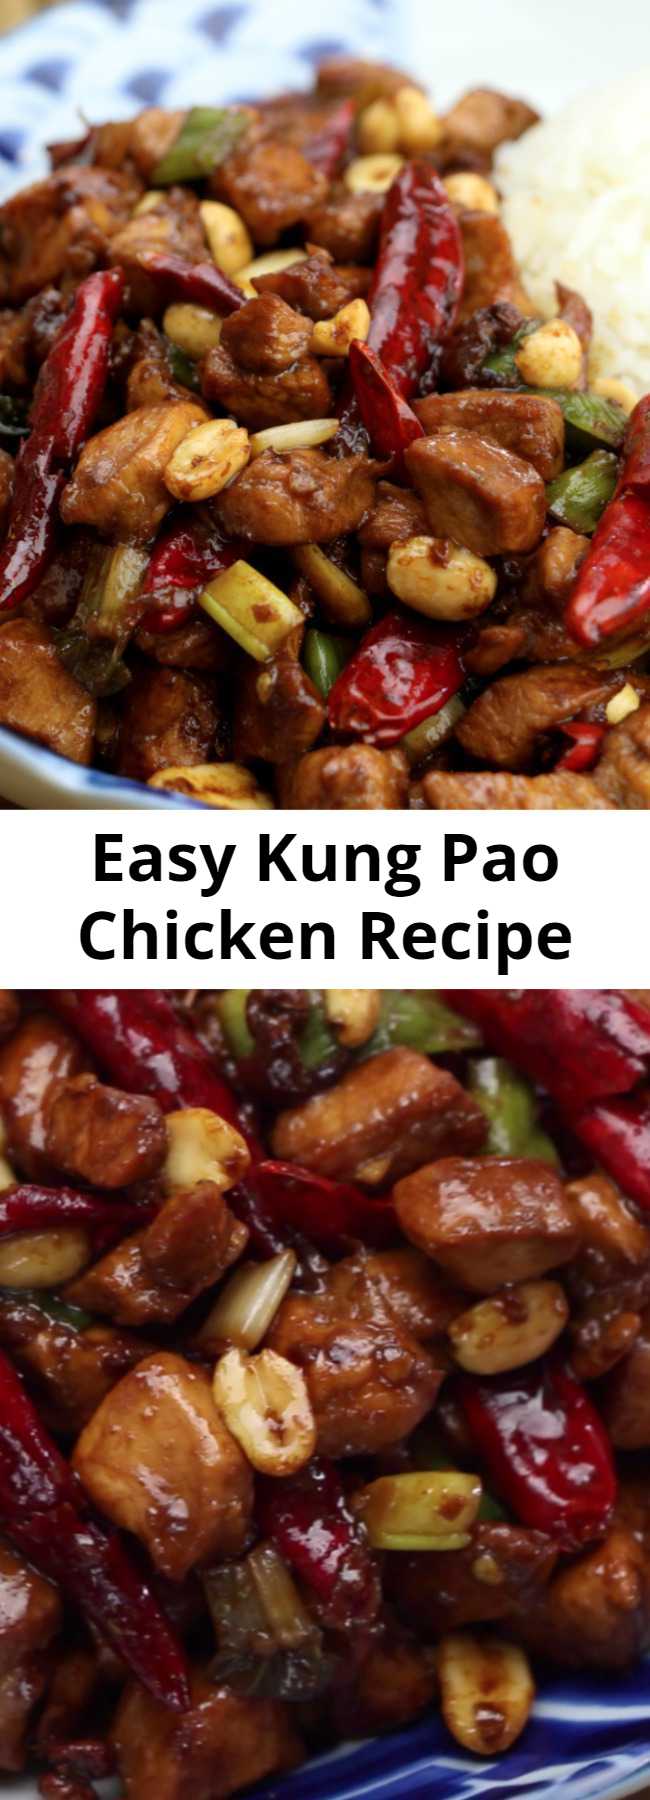 Easy Kung Pao Chicken Recipe - Spicy, sweet and incredibly delicious chicken with peanuts!